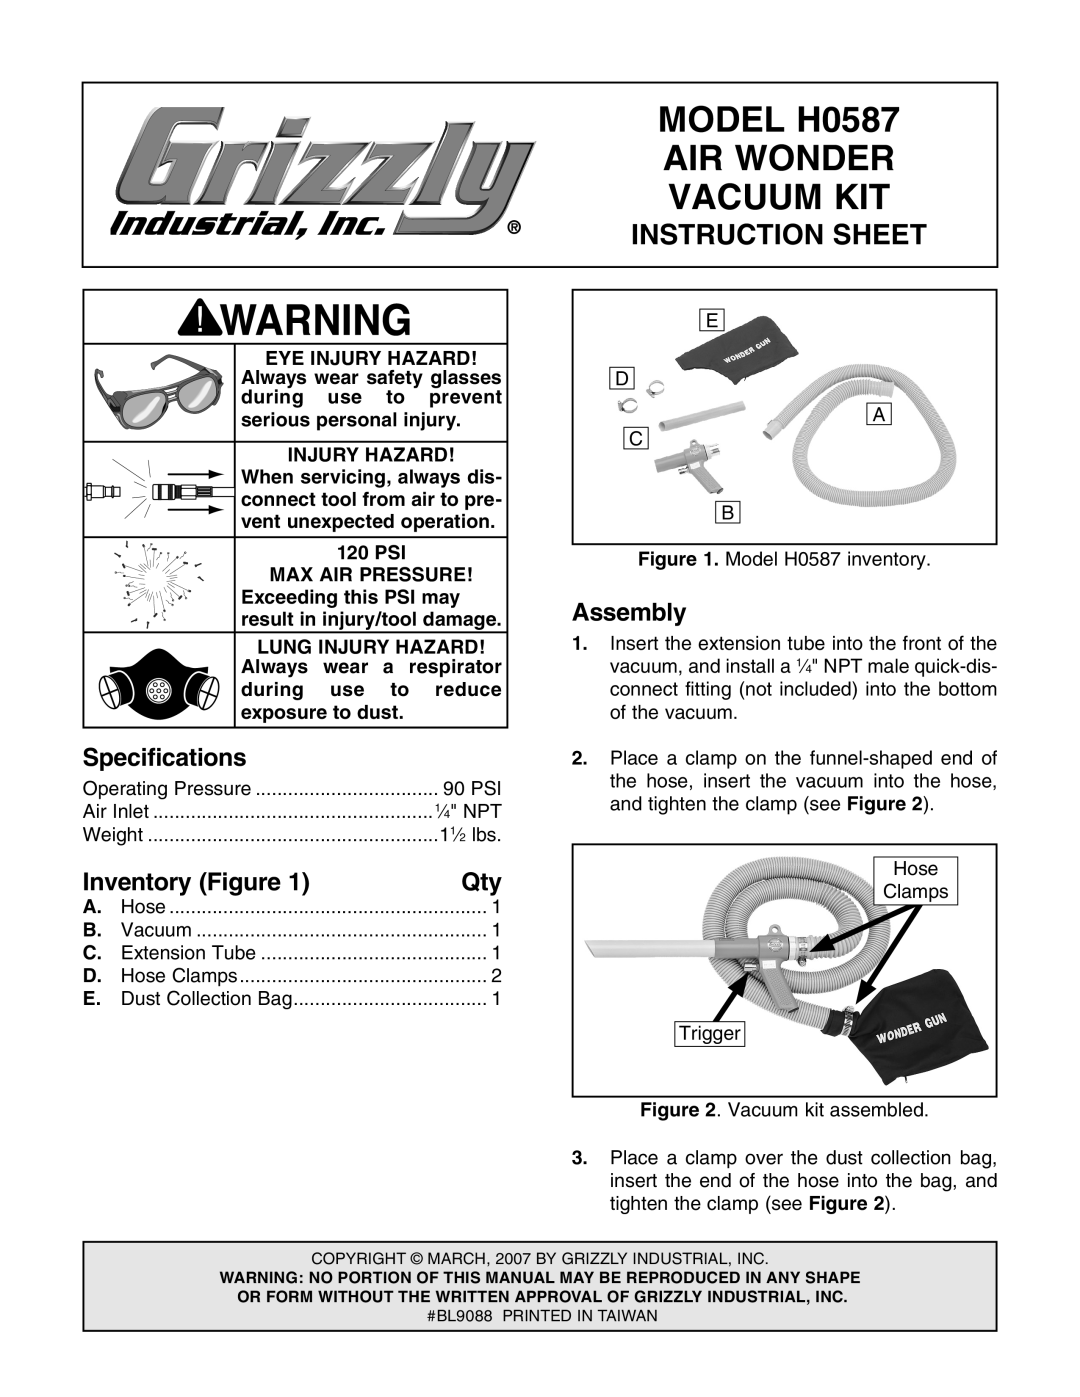 Grizzly specifications Specifications, Inventory Figure, MODEL H0587, Air Wonder, Vacuum Kit, Instruction Sheet 